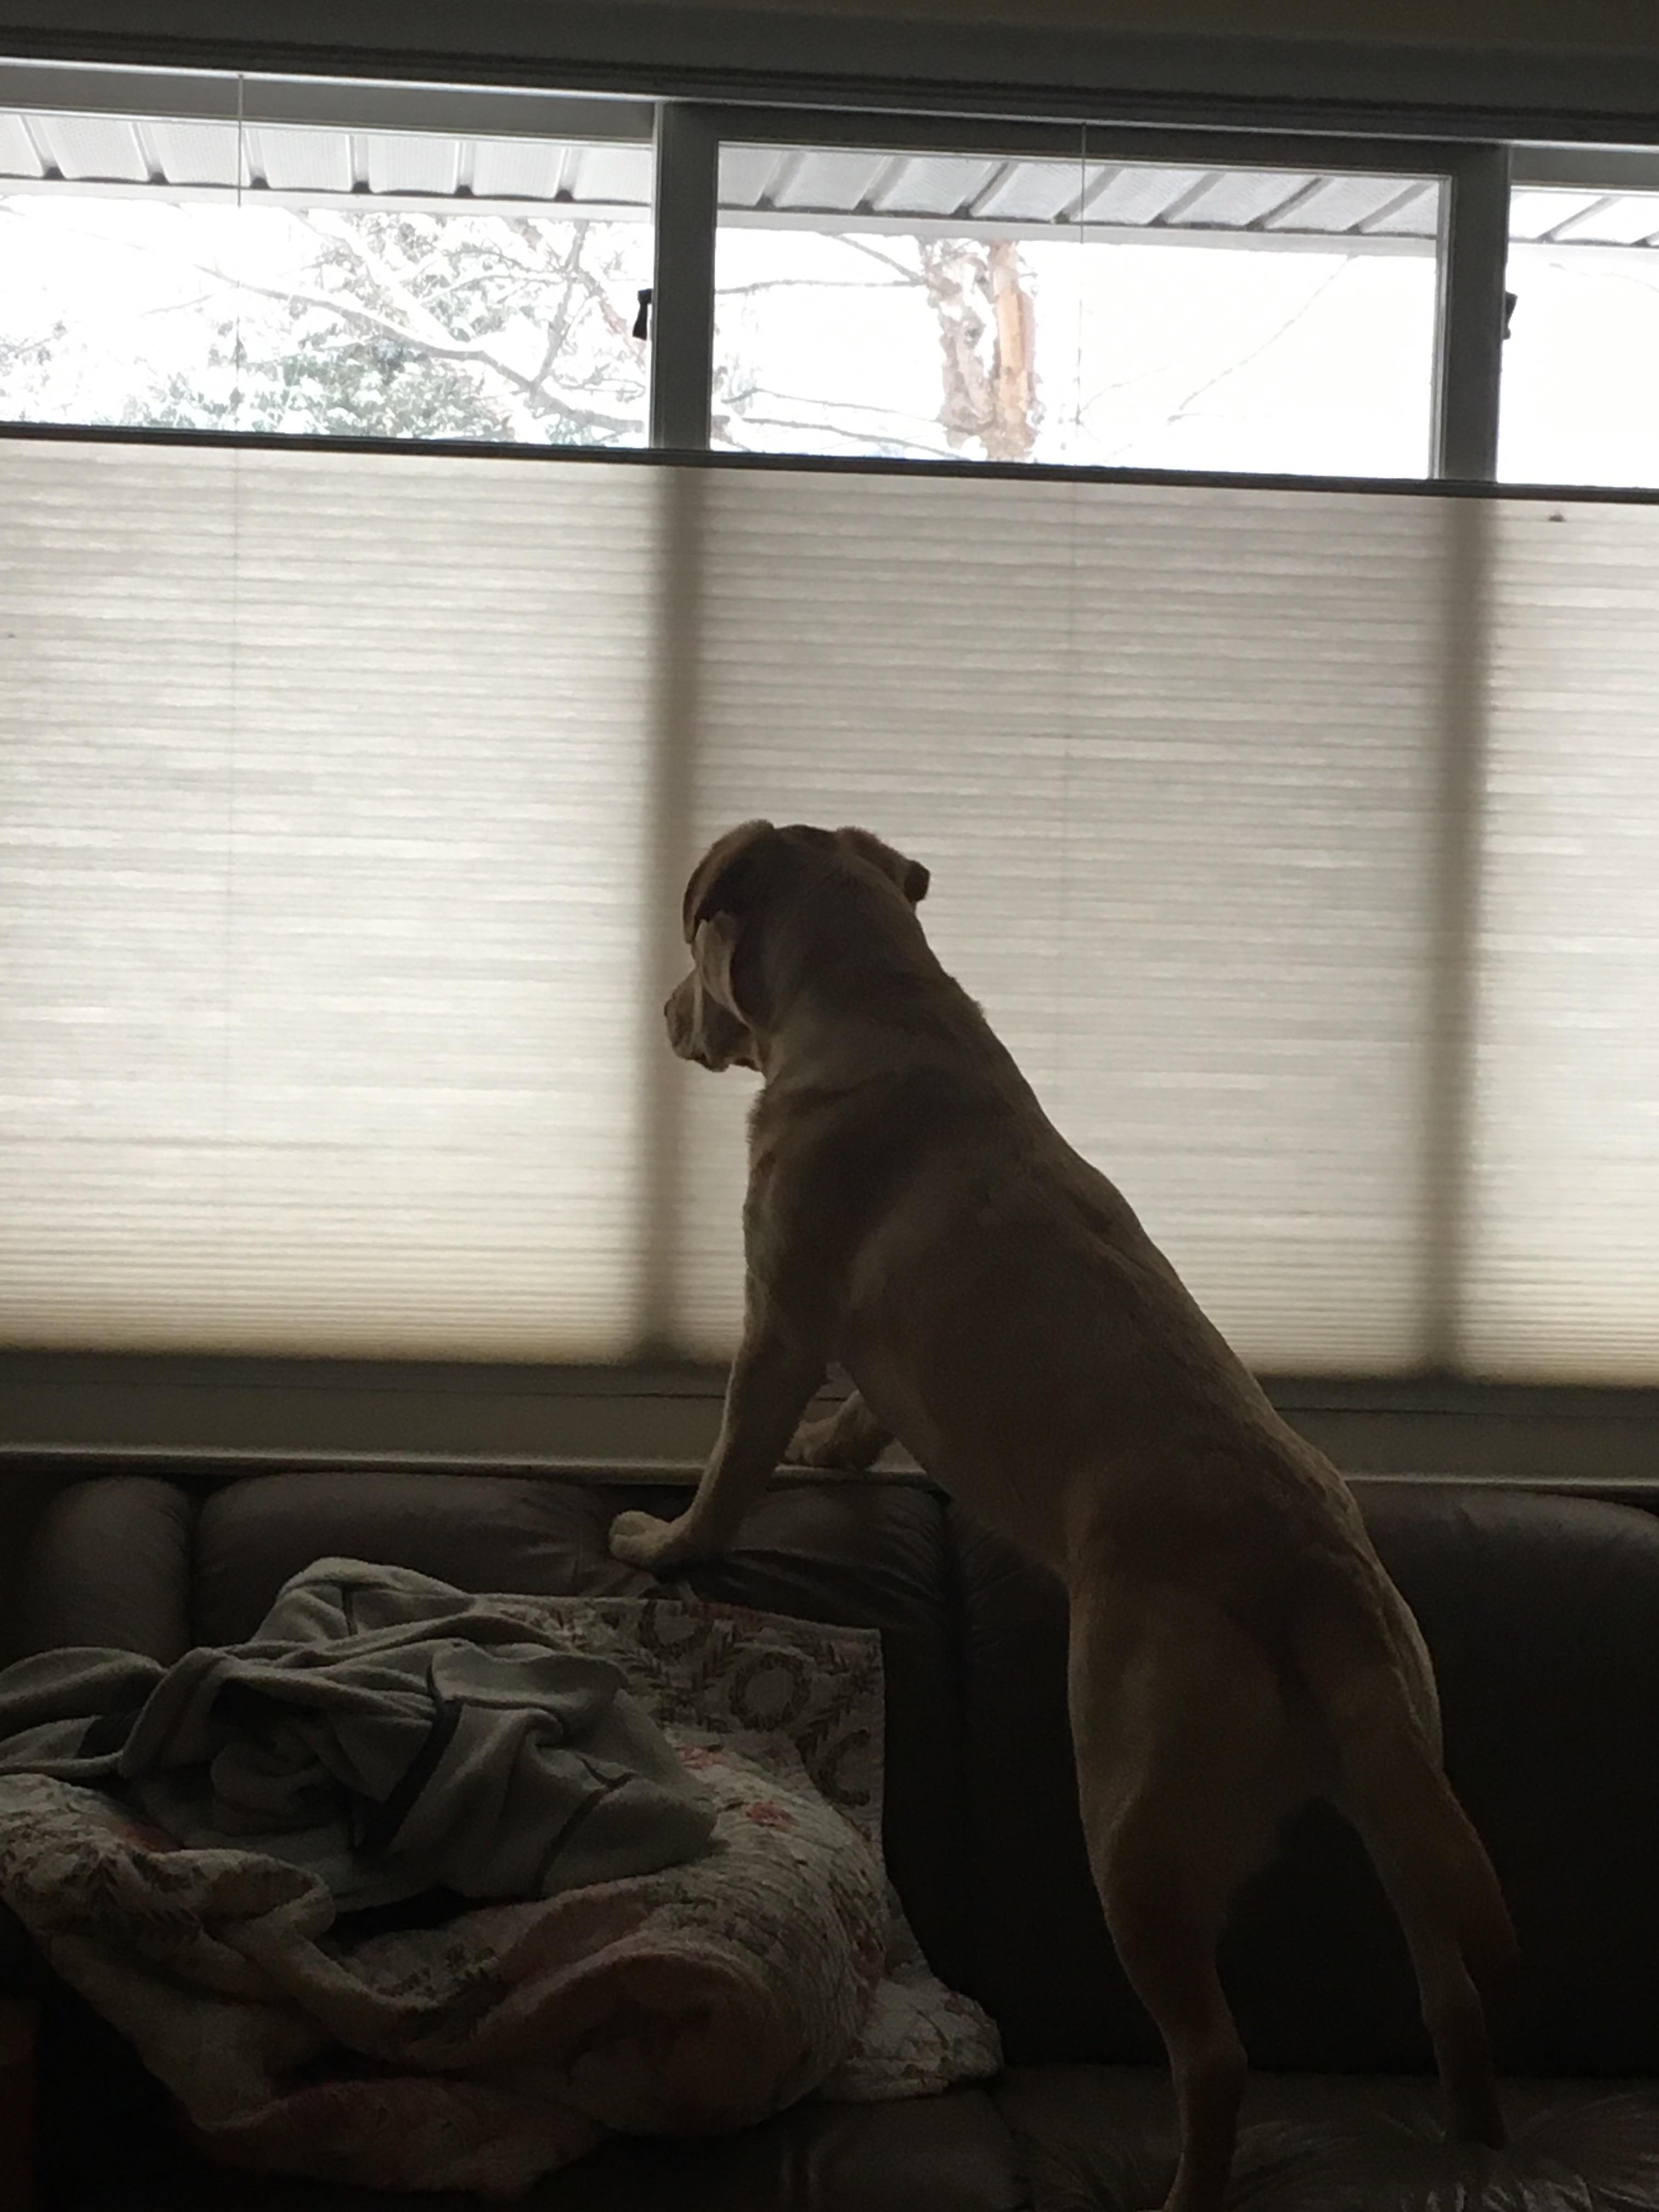 My dog recently lost her eyesight, but still runs to the window whenever she hears that snowplow...